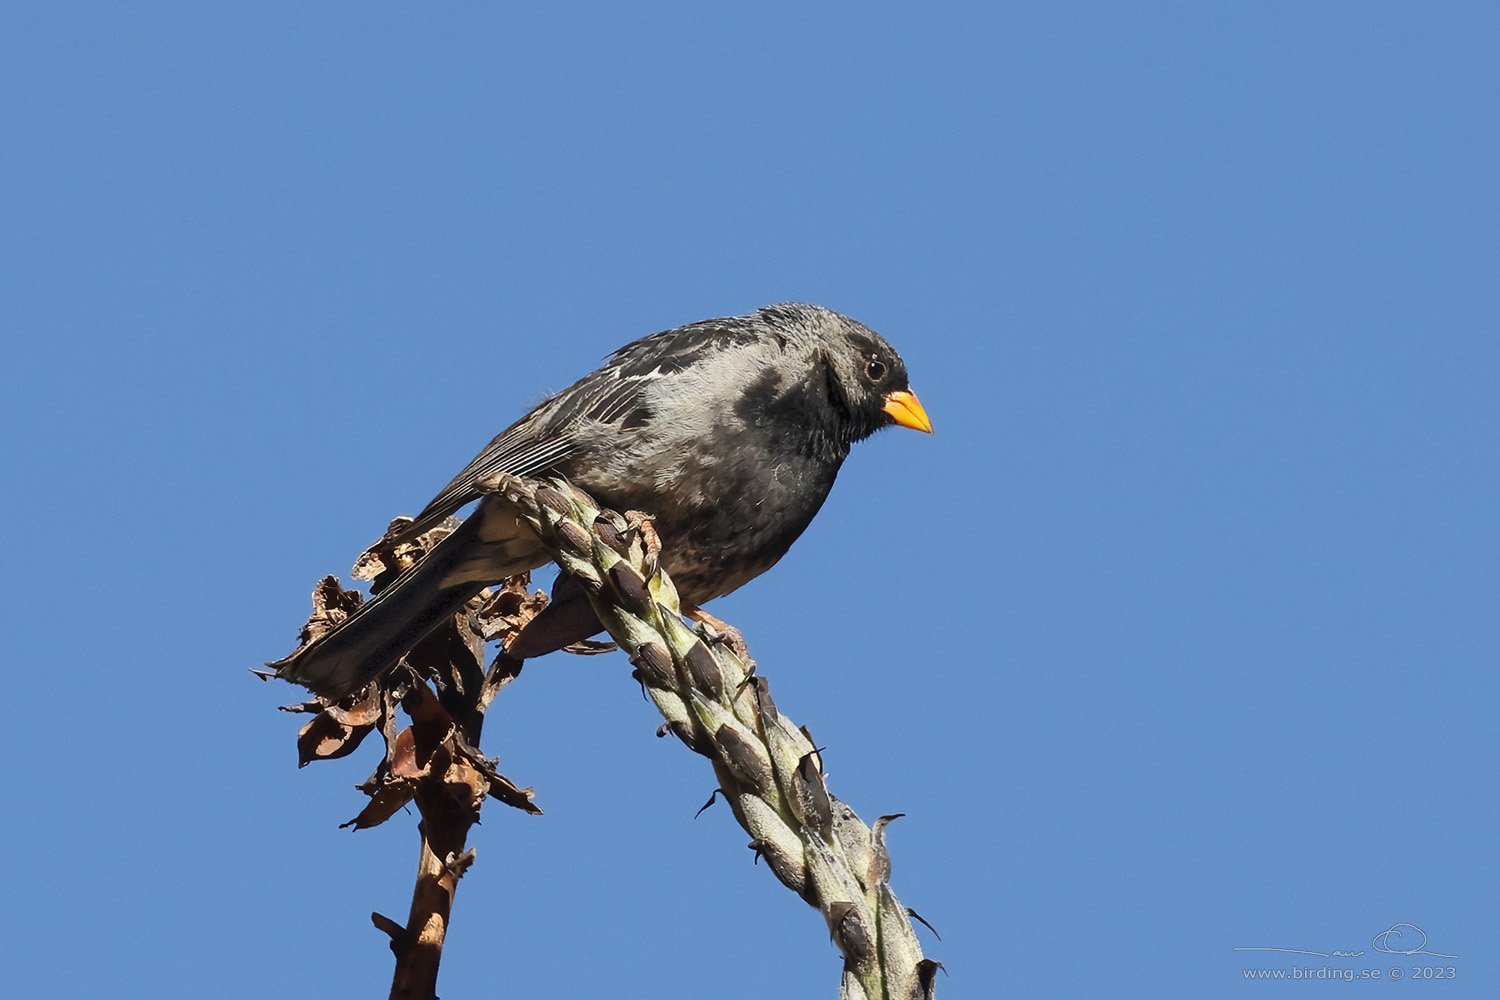 MOURNING SIERRA FINCH (Rhopospina fruticeti) - Stäng / close